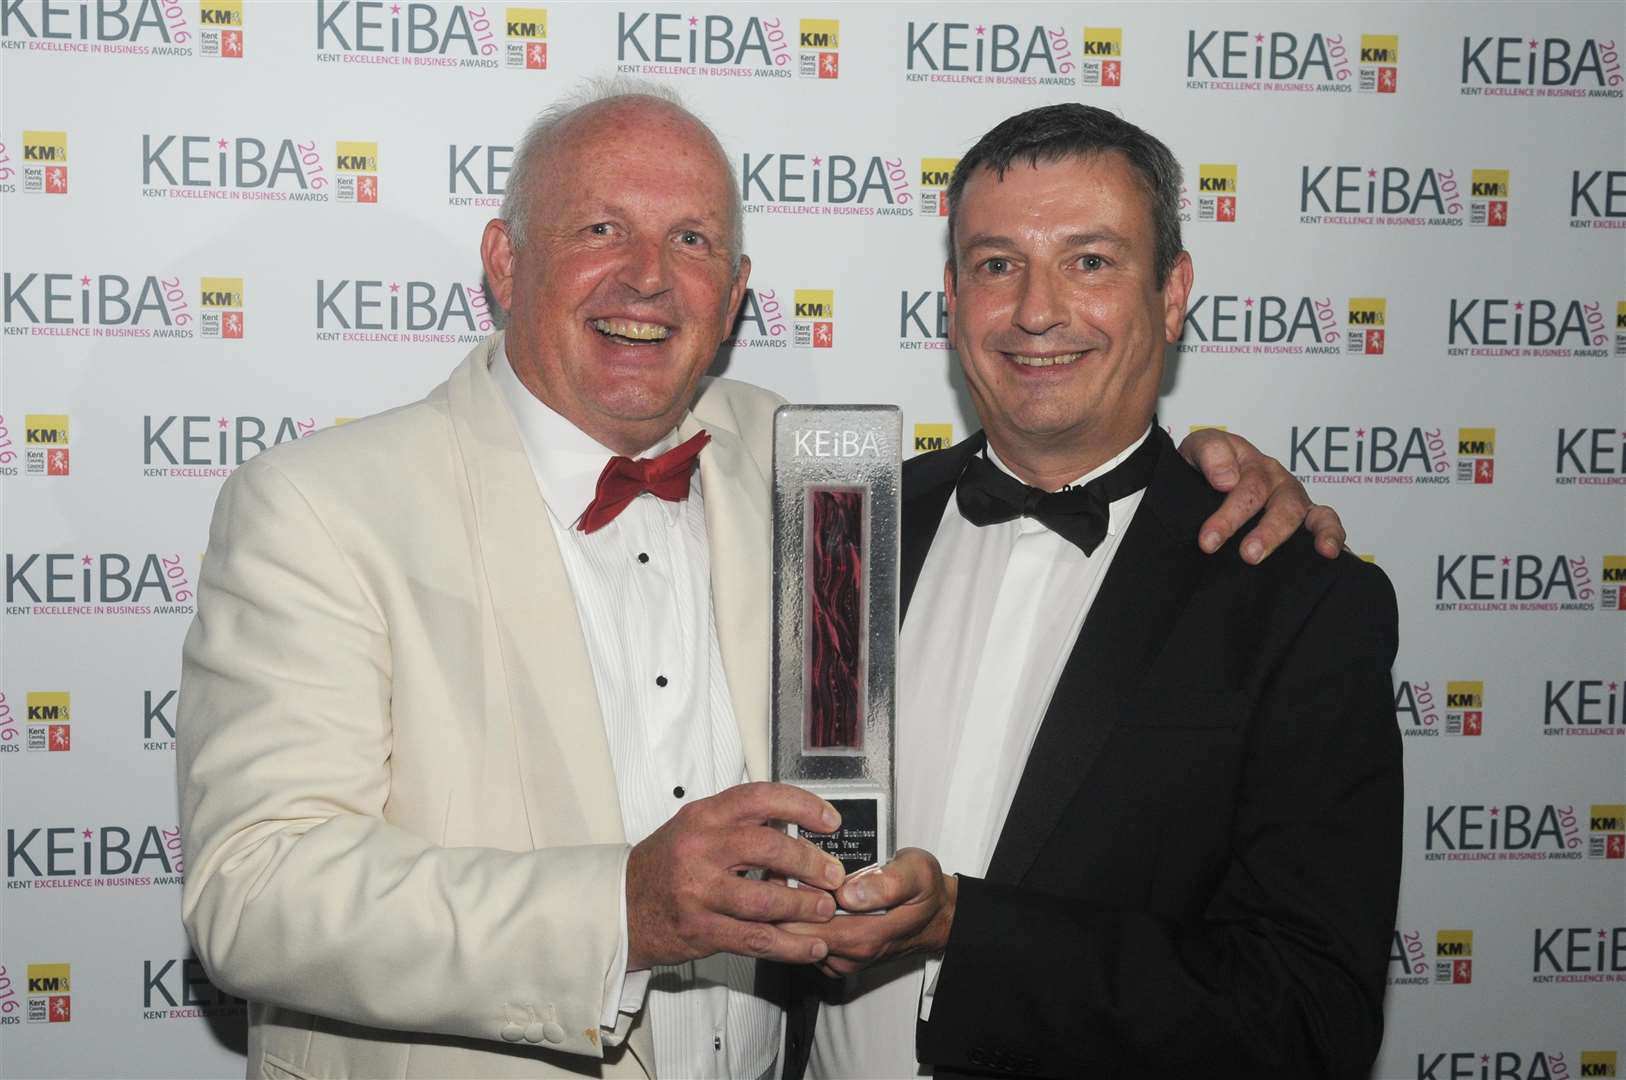 Peter Shawyer and Andy McLeod of Texcel Technology won technology business of the year at last year's KEiBA